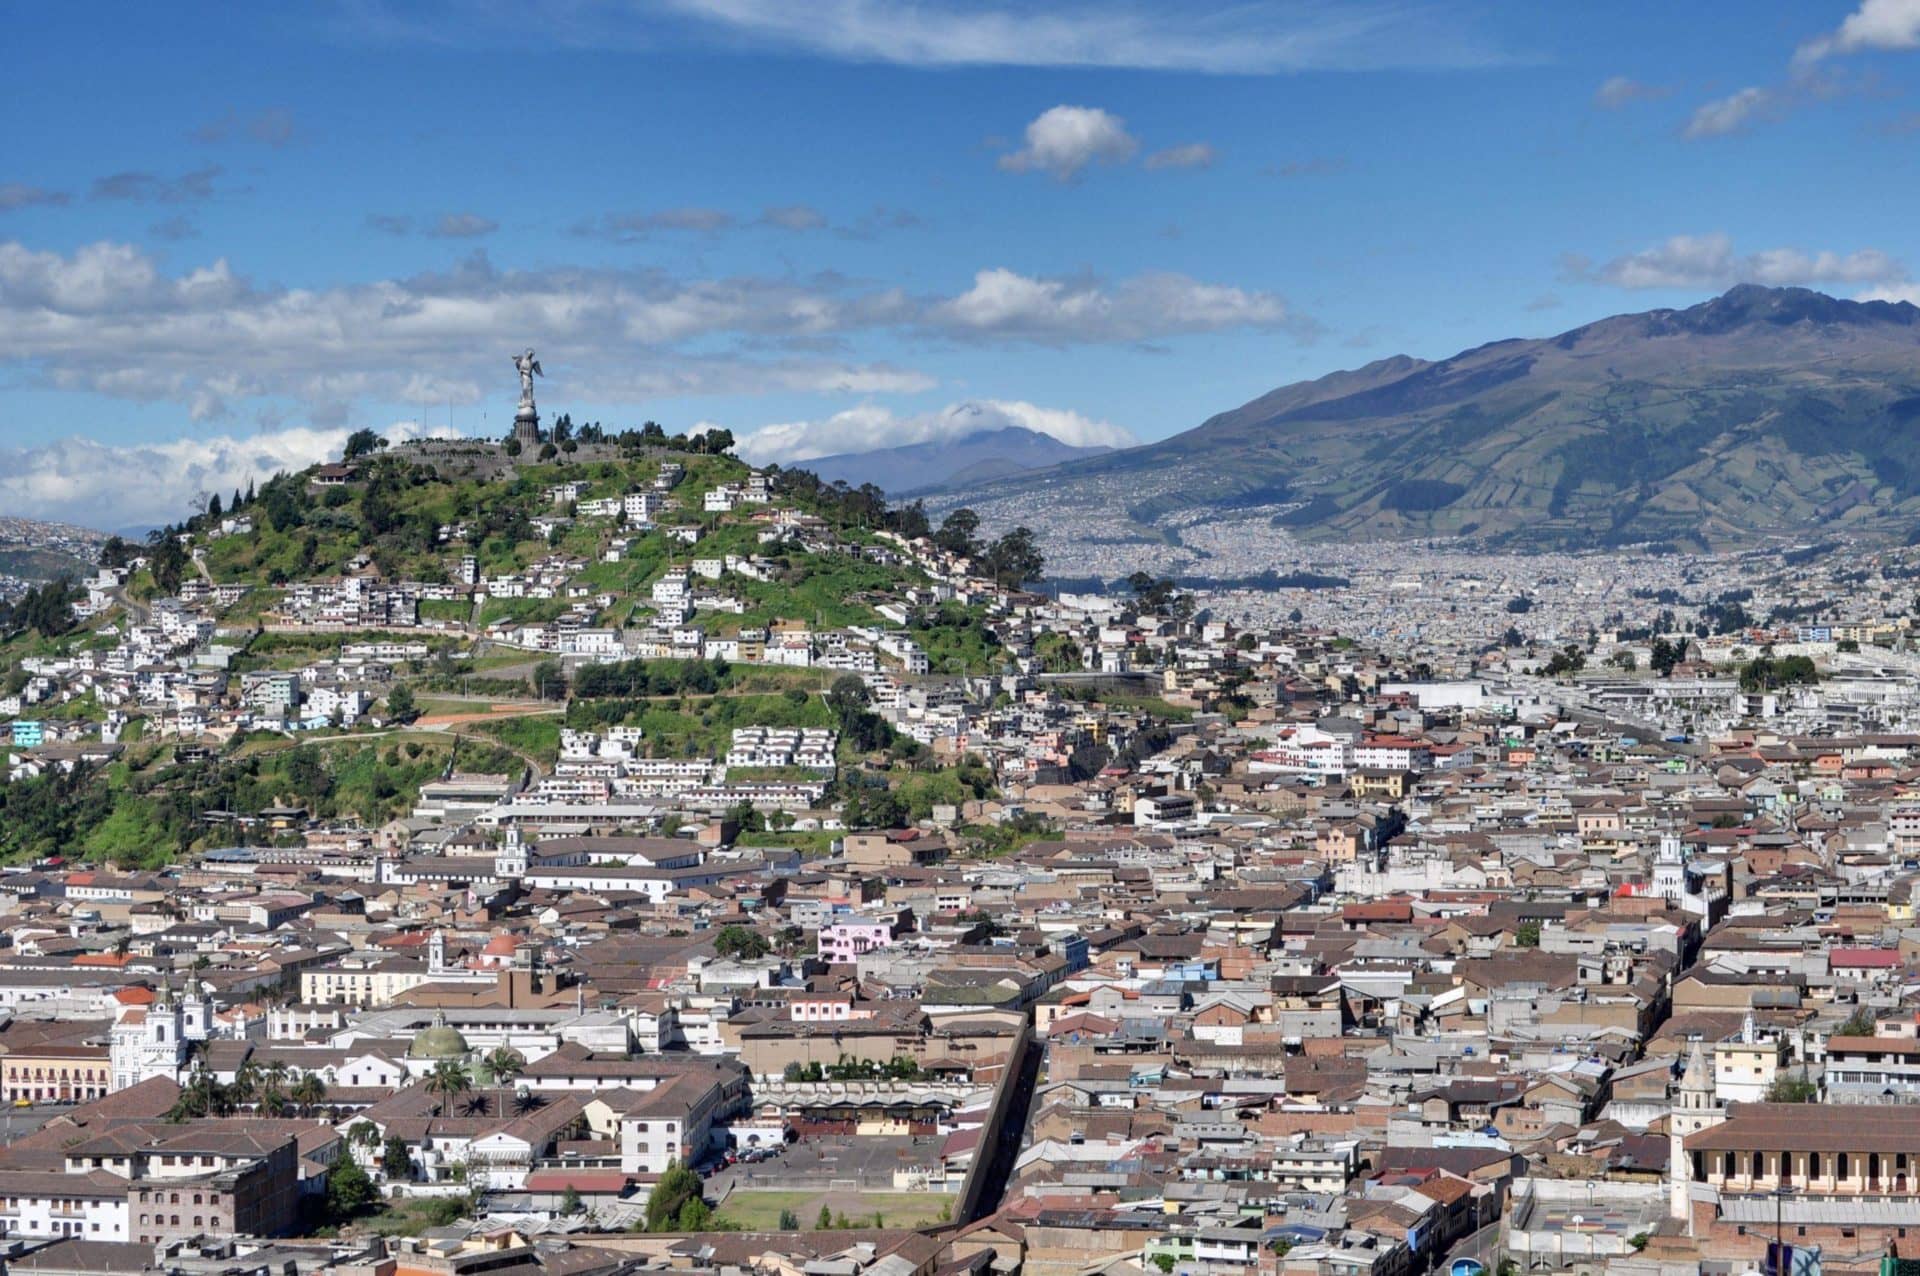 Quito Ecuador: The world’s second-highest capital city (and not because they legalized drugs).